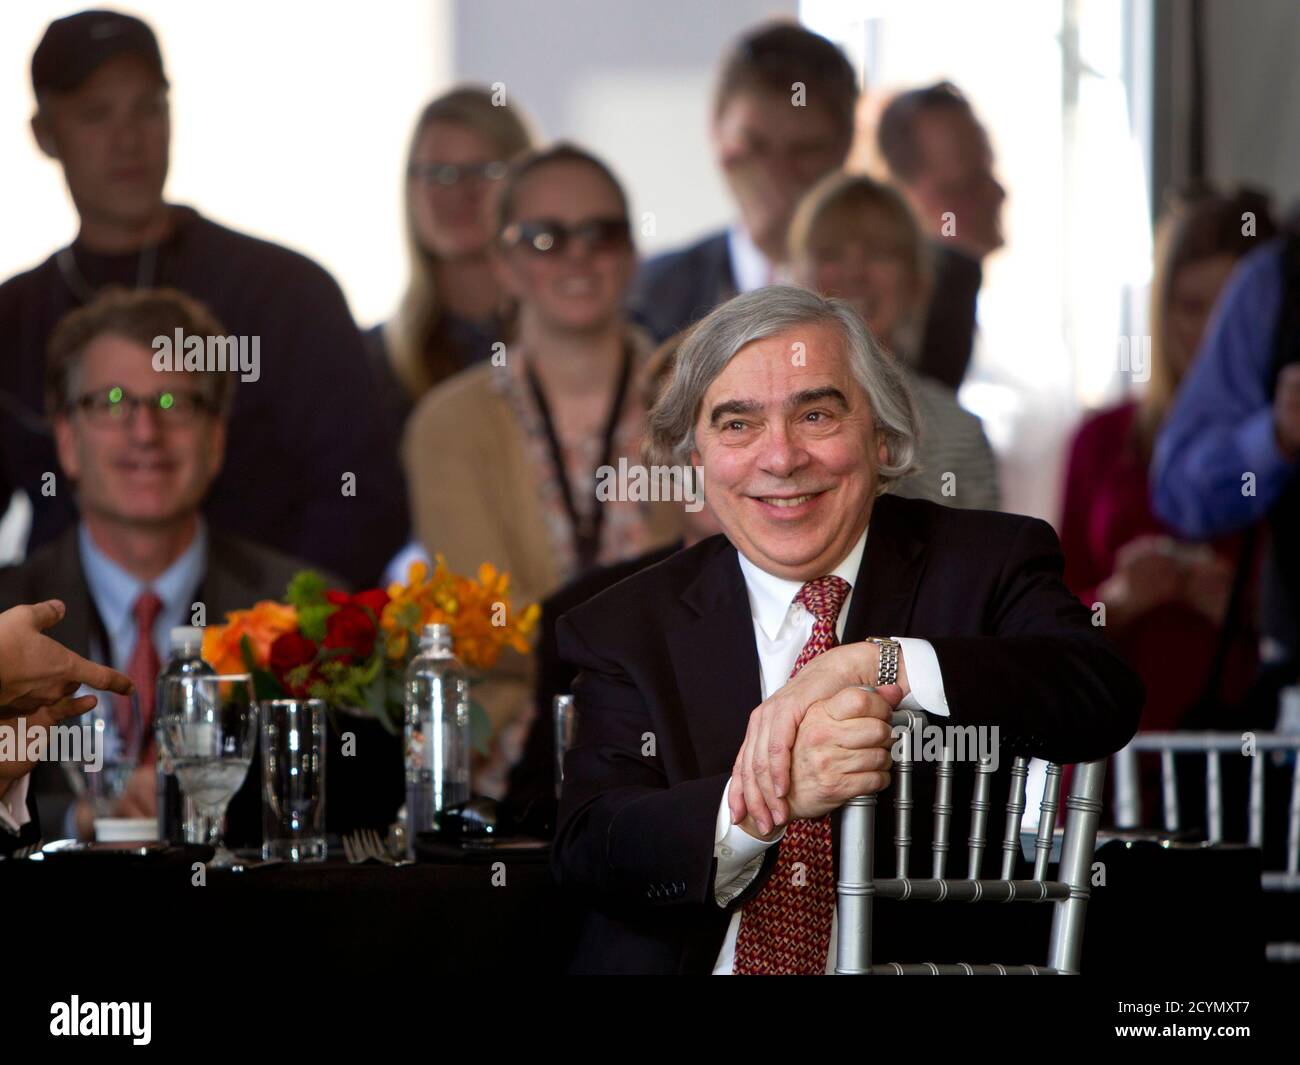 United States Secretary of Energy Ernest Moniz listens to speakers during the grand opening of the Ivanpah Solar Electric Generating System in the Mojave Desert near the California-Nevada border February 13, 2014. The project, a partnership of NRG, BrightSource, Google and Bechtel, is the world's largest solar thermal facility and uses 347,000 sun-facing mirrors to produce 392 Megawatts of electricity, enough energy to power more than 140,000 homes. REUTERS/Steve Marcus (UNITED STATES - Tags: ENERGY SCIENCE TECHNOLOGY BUSINESS) Stock Photo